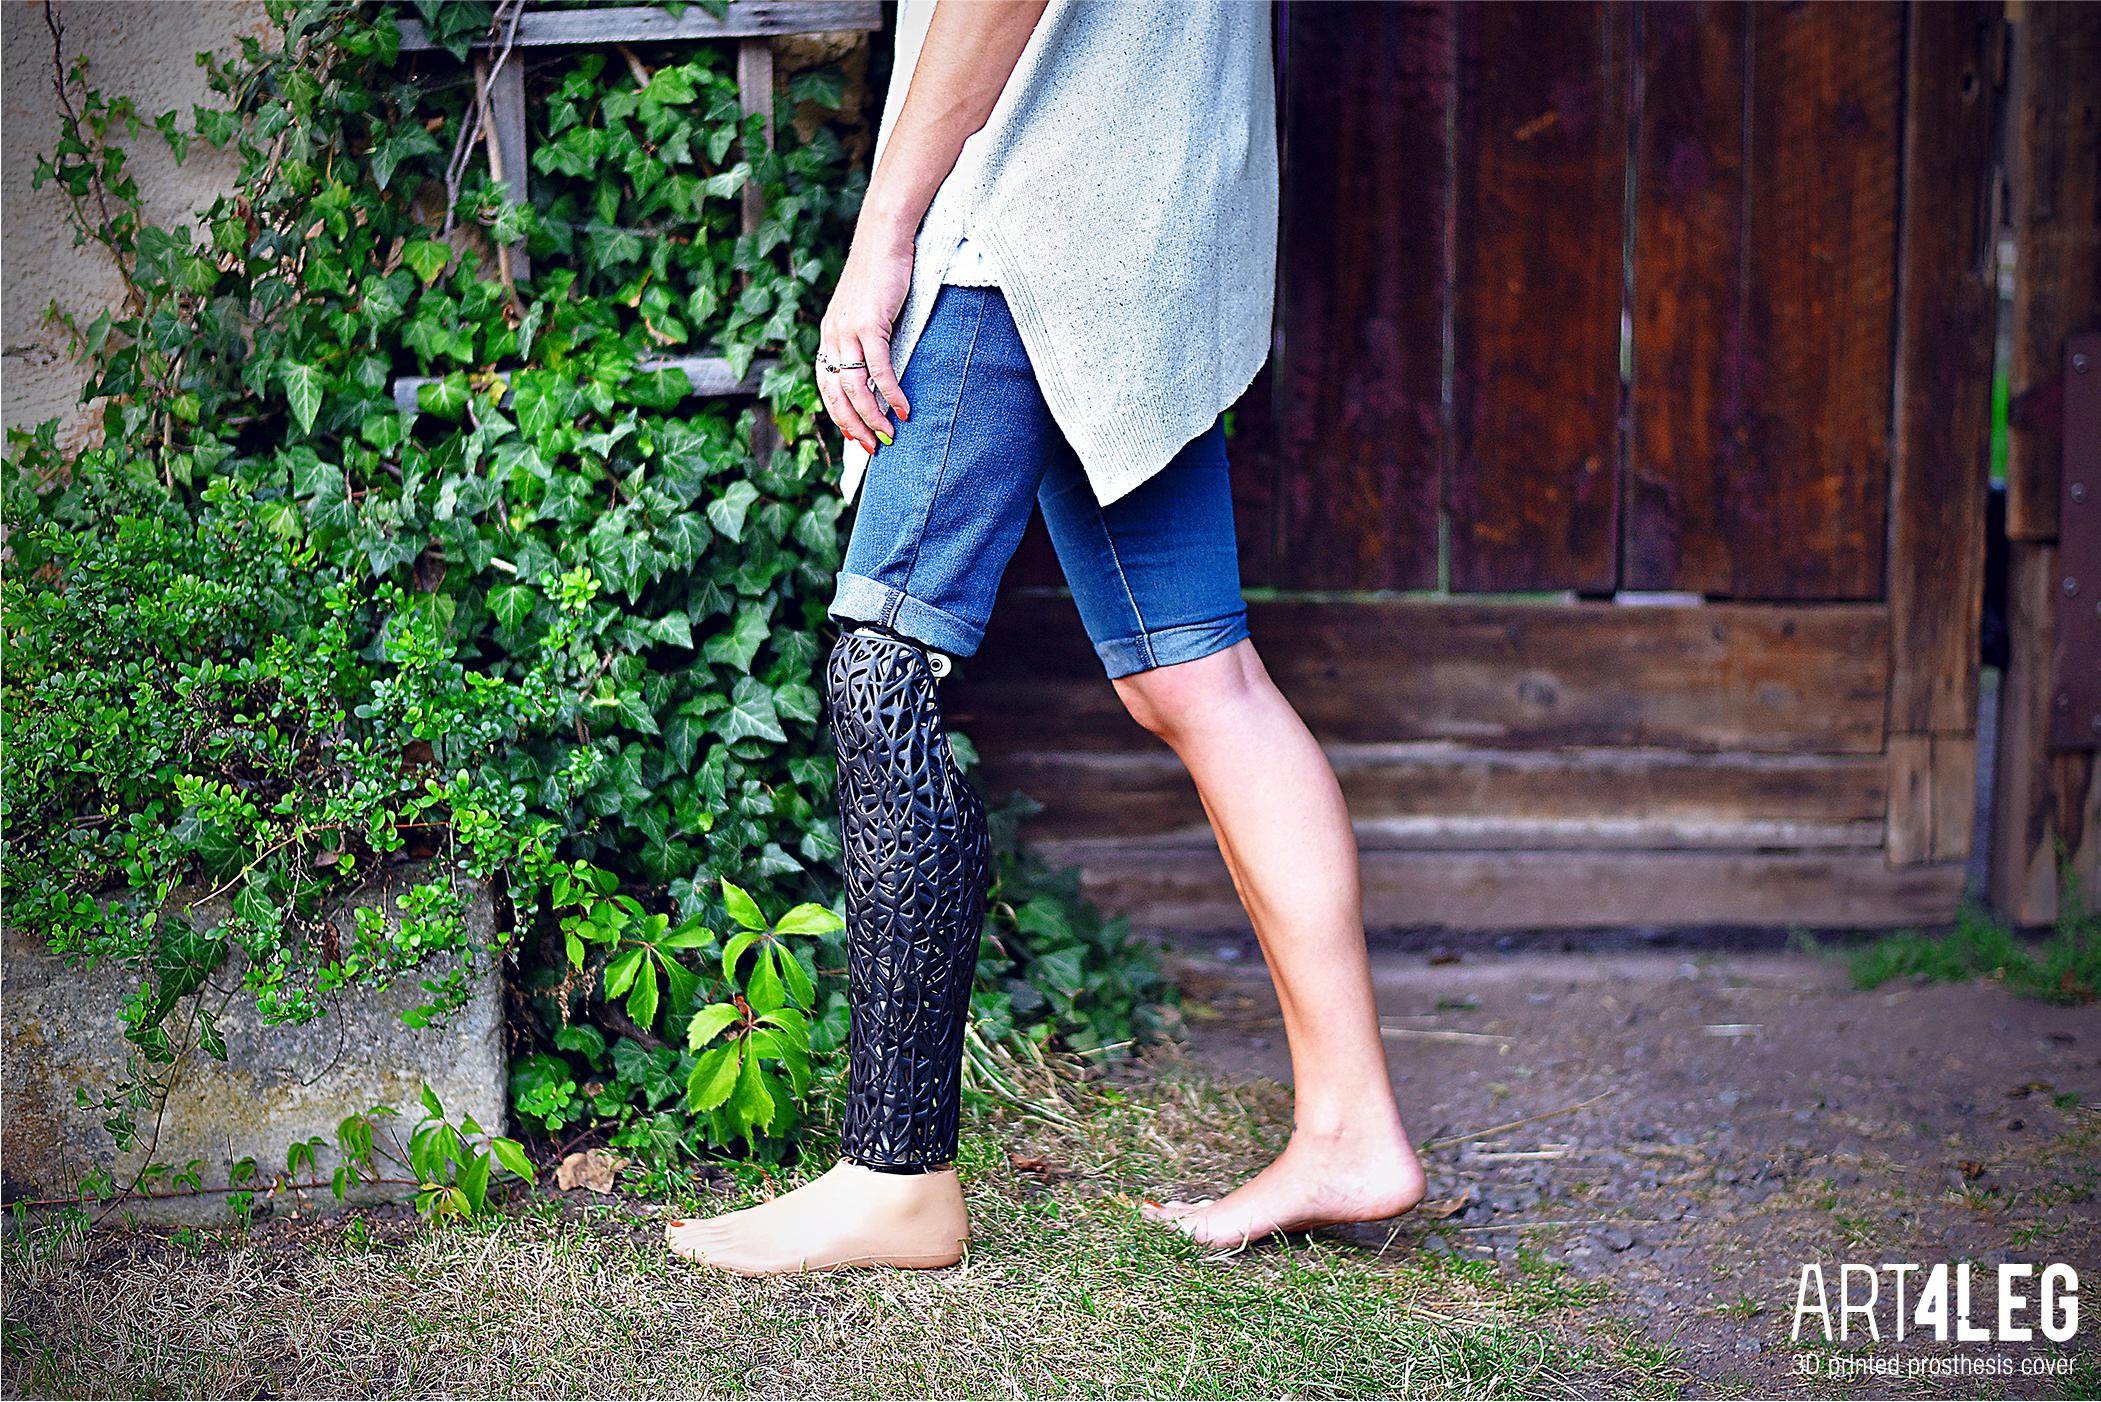 UNYQ Now taking pre-orders for below knee prosthetic covers